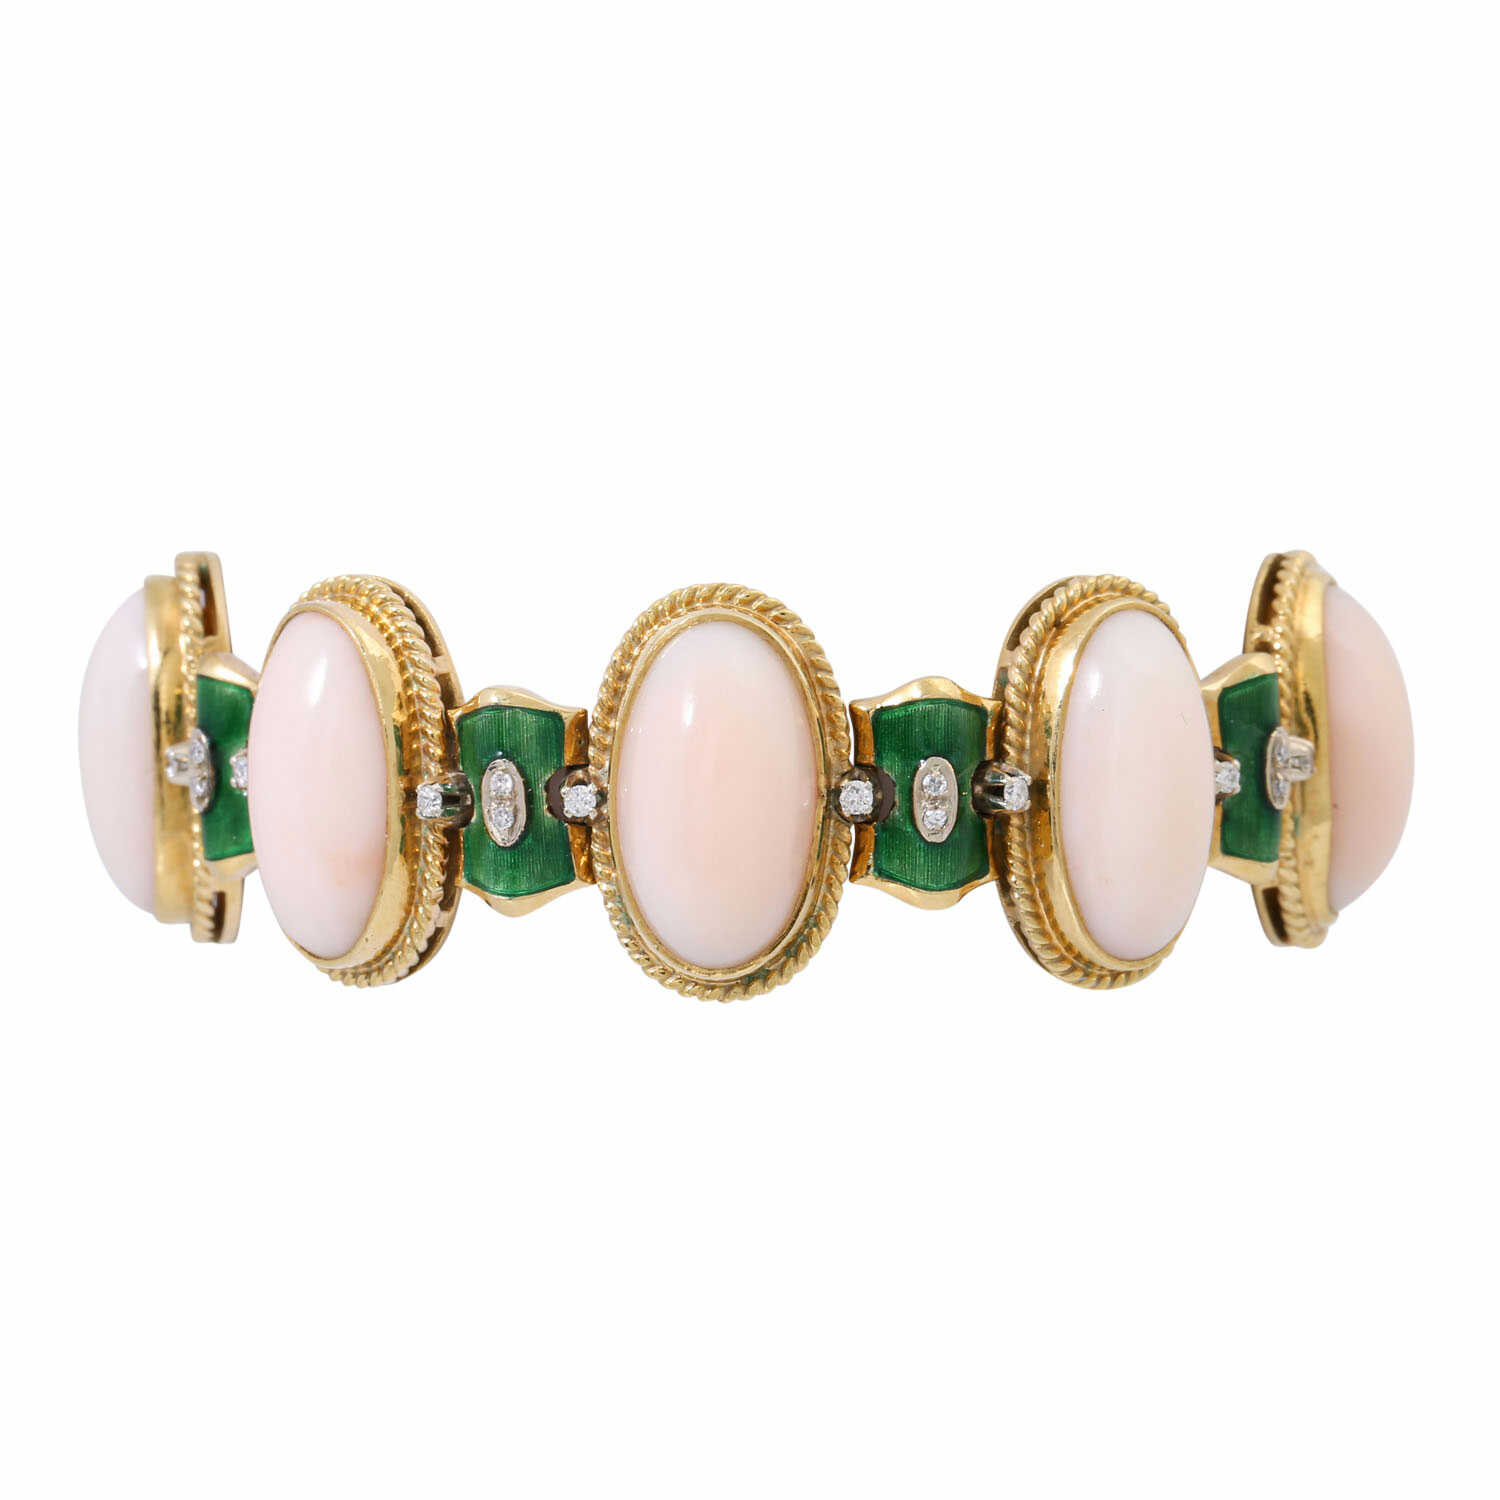 Bracelet with oval angel skin coral, green enamel and diamonds